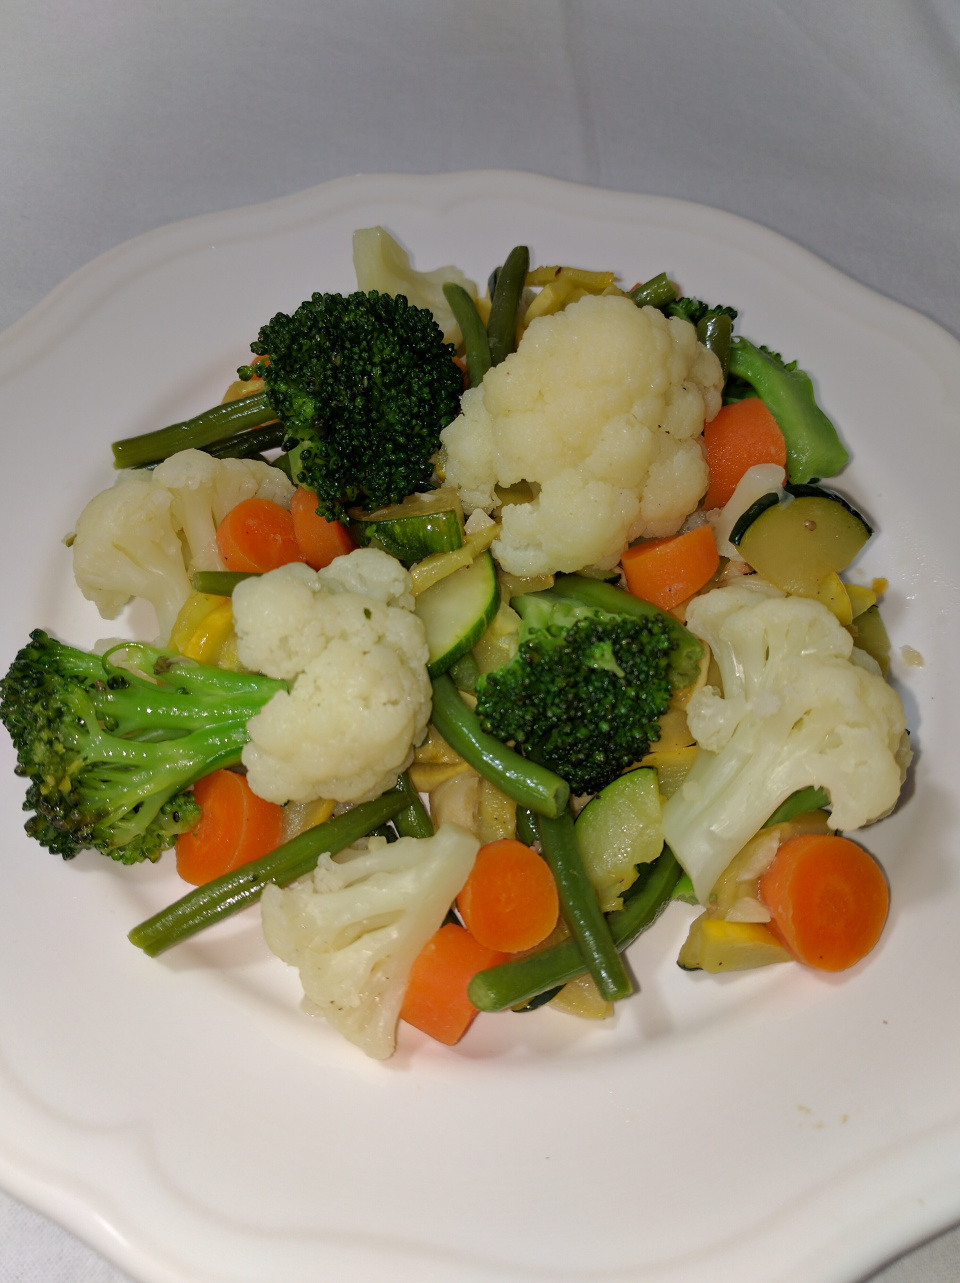 califlower and steamed mixed vegetables